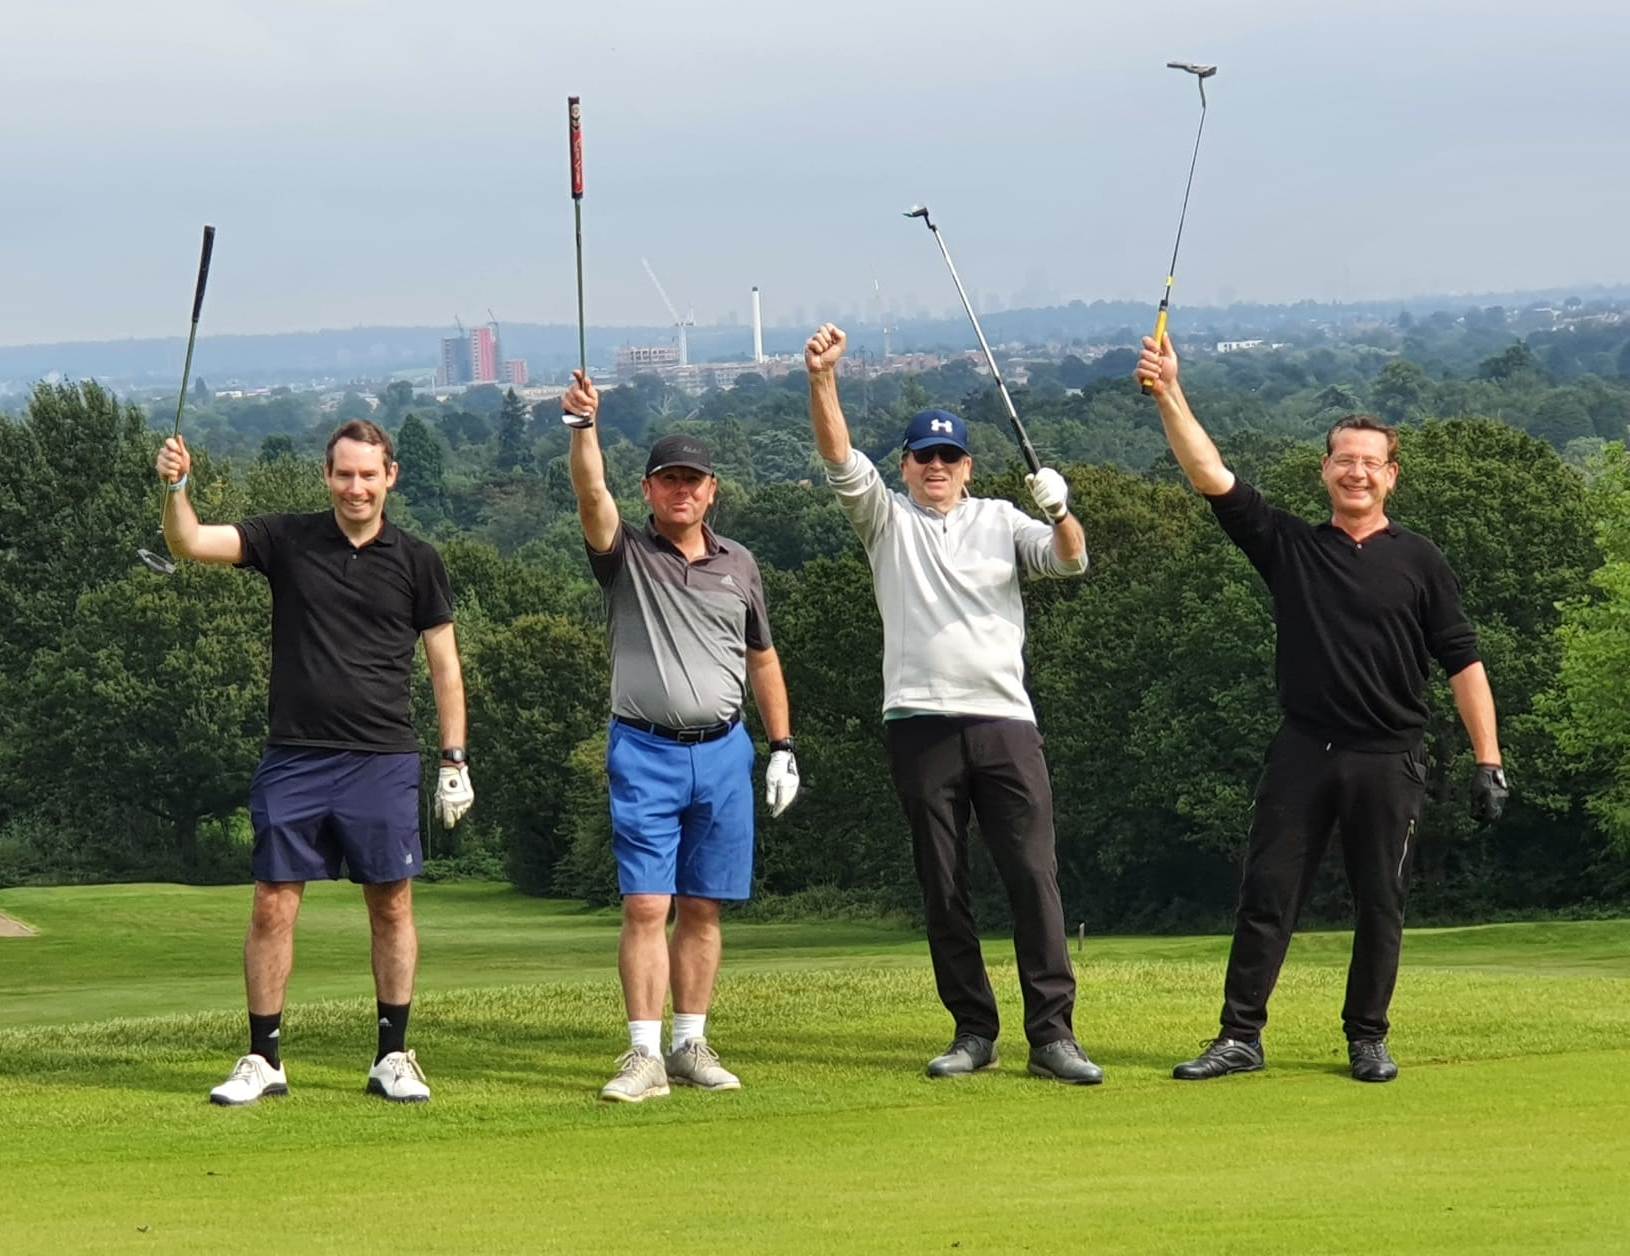 An image of Pinner Lawn Tennis Club members playing golf